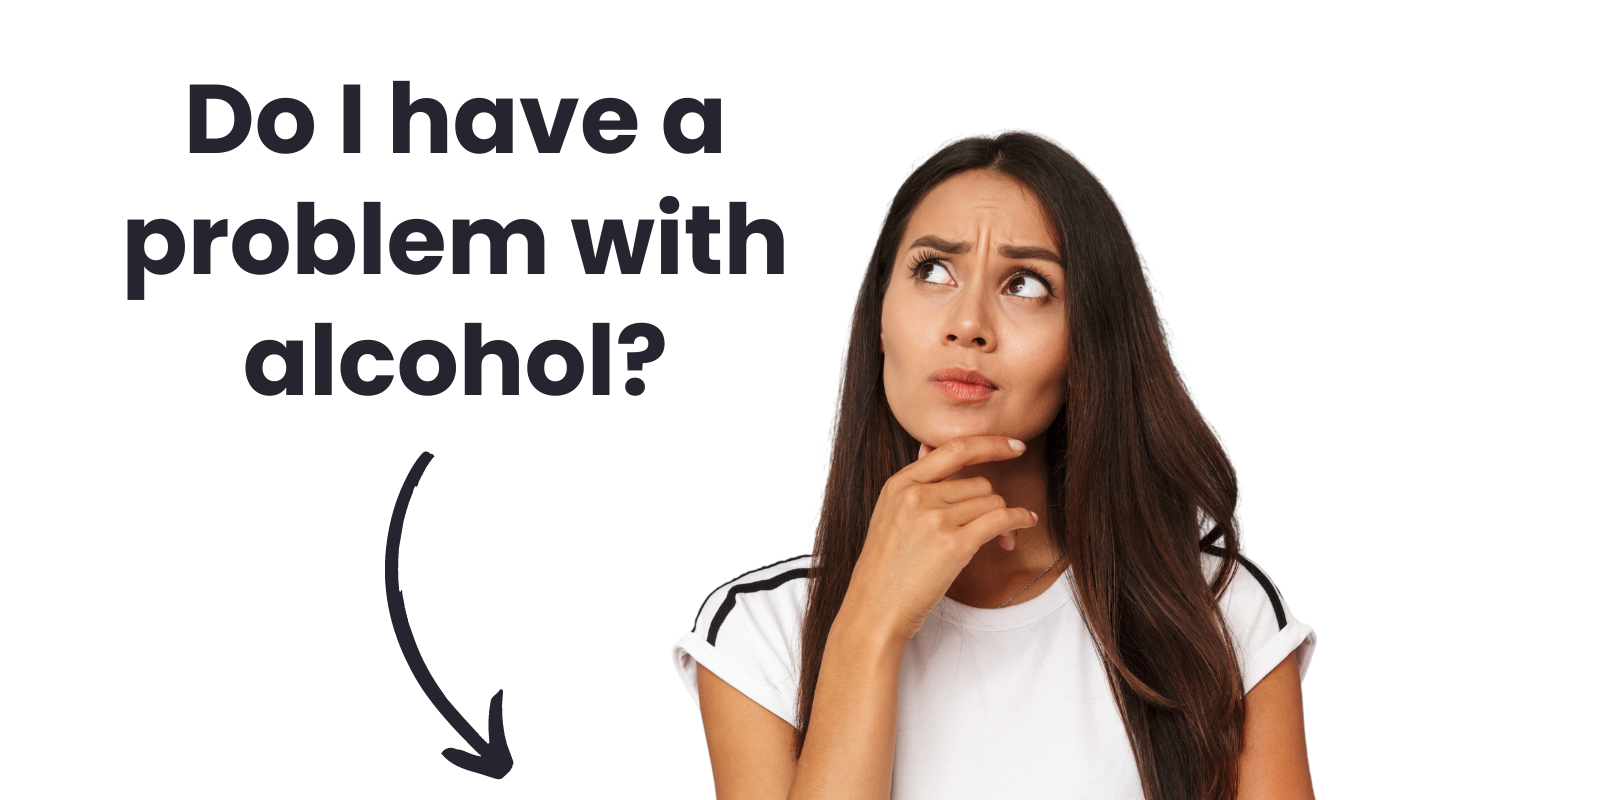 do I have a problem with alcohol? Am I an alcoholic?